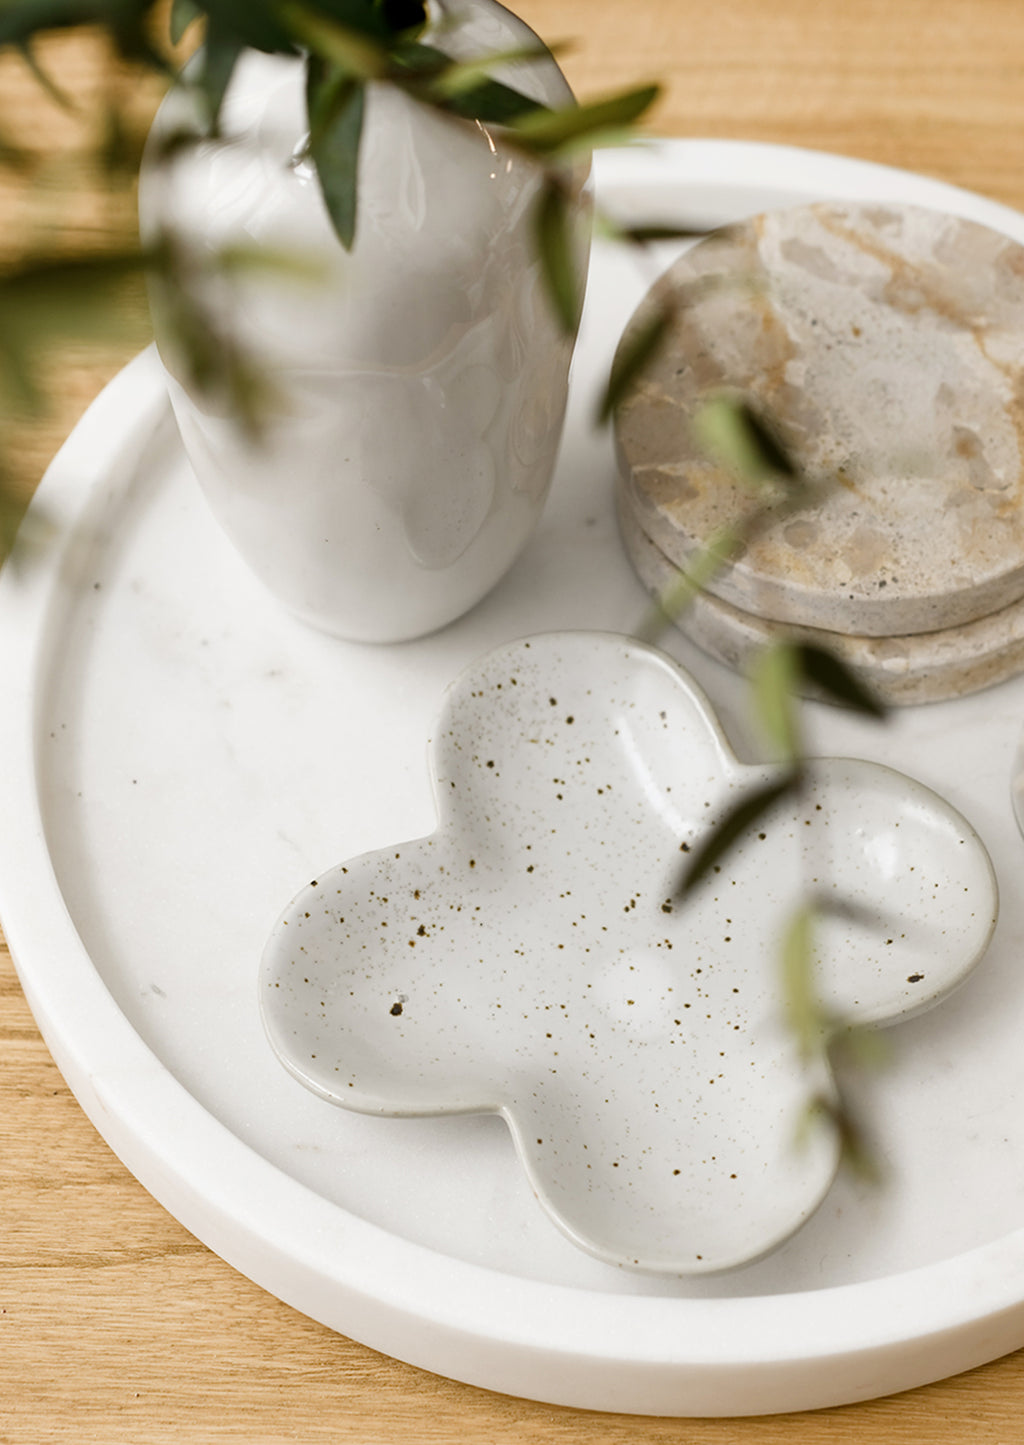 2: A clover shaped little dish in speckled white ceramic.